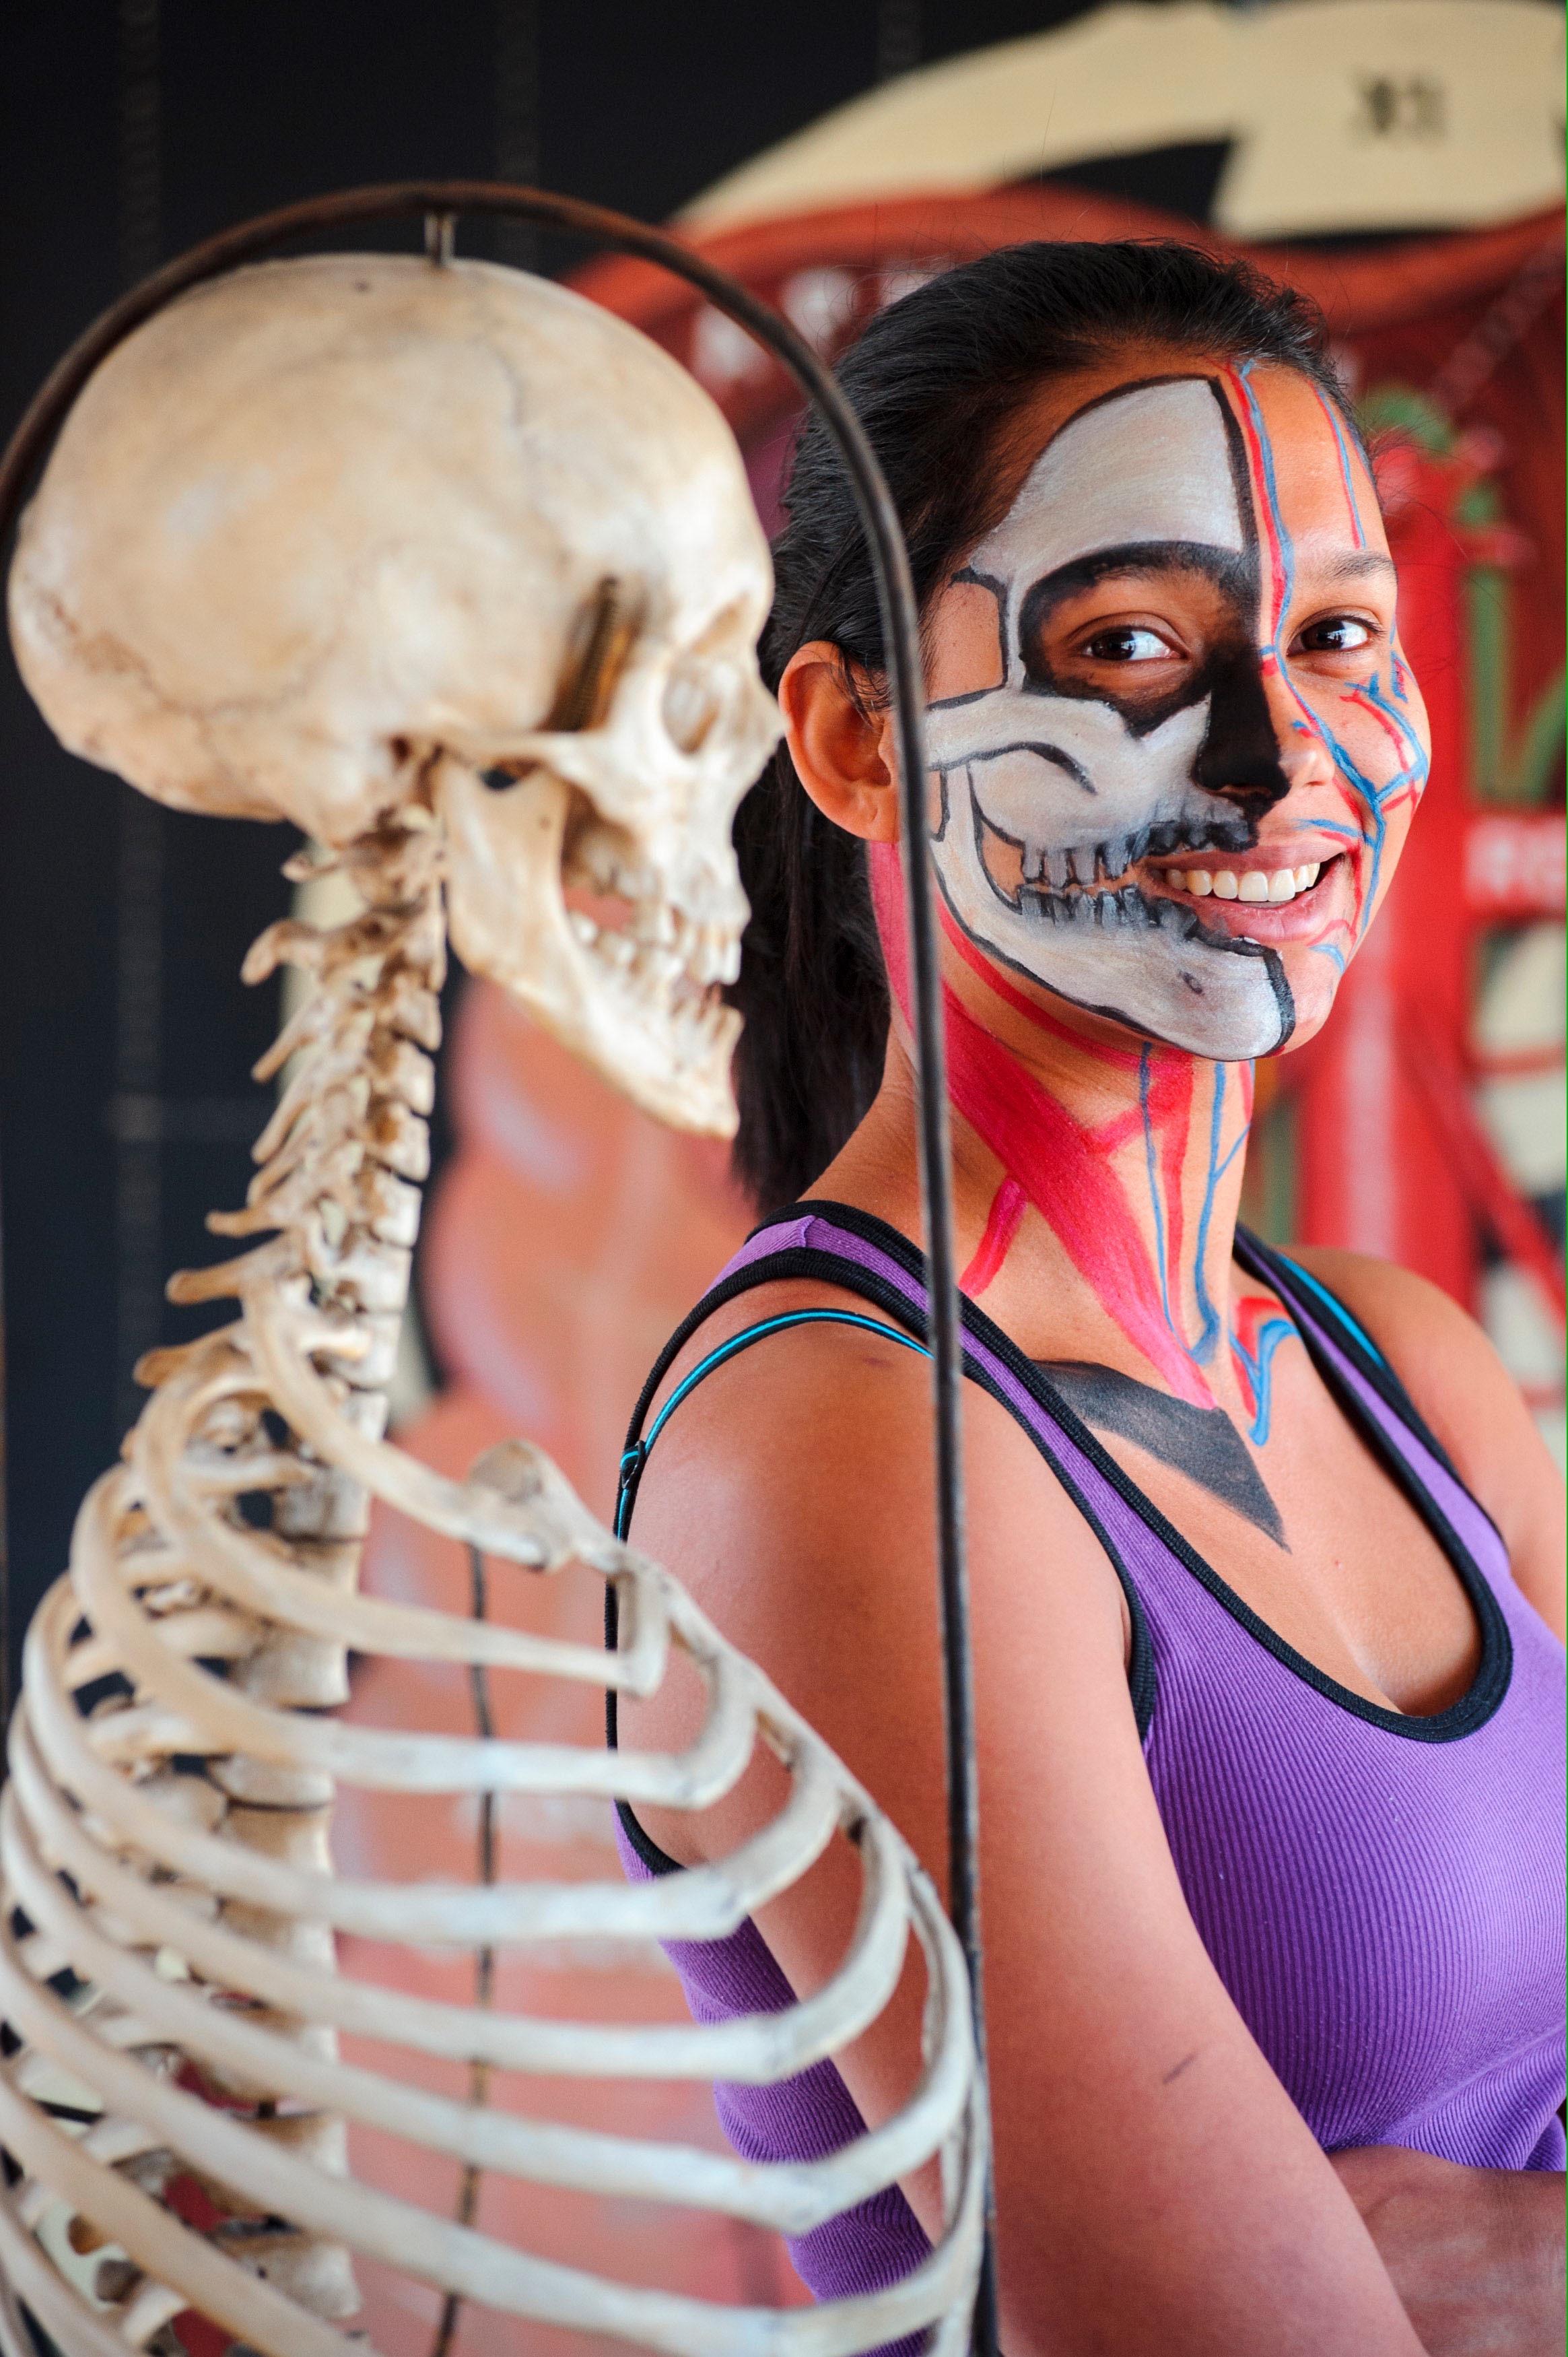 Art And Anatomy Event Illustrates The Wonders Of The Human Body The Edinburgh Reporter